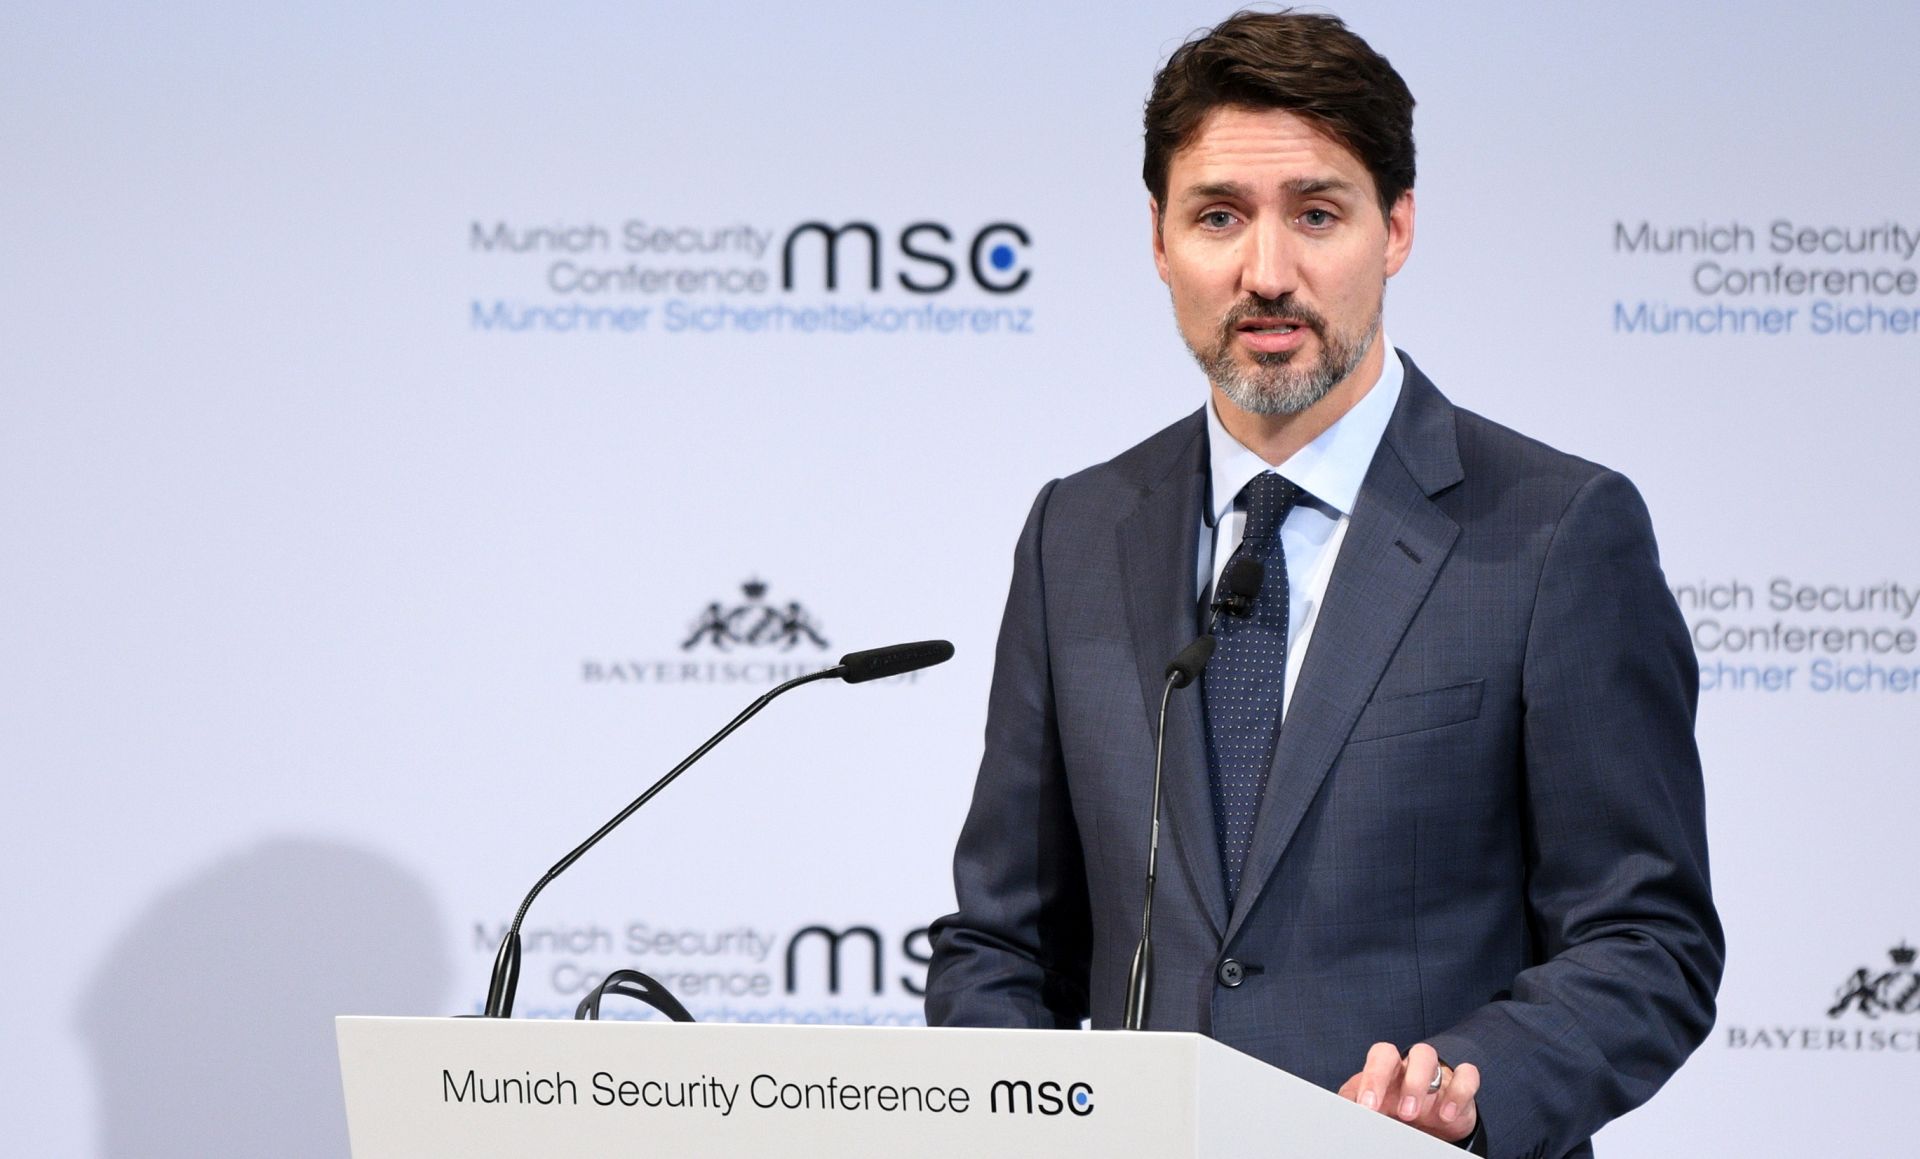 epa08217702 Canadian Prime Minister Justin Trudeau addresses an audience during the panel discussion 'Westlessness in the West: What Are We Defending?' at the 56th Munich Security Conference (MSC) in Munich, Germany, 14 February 2020. More than 500 high-level international decision-makers meet at the 56th Munich Security Conference in Munich during their annual meeting from 14 to 16 February 2020 to discuss global security issues.  EPA/PHILIPP GUELLAND